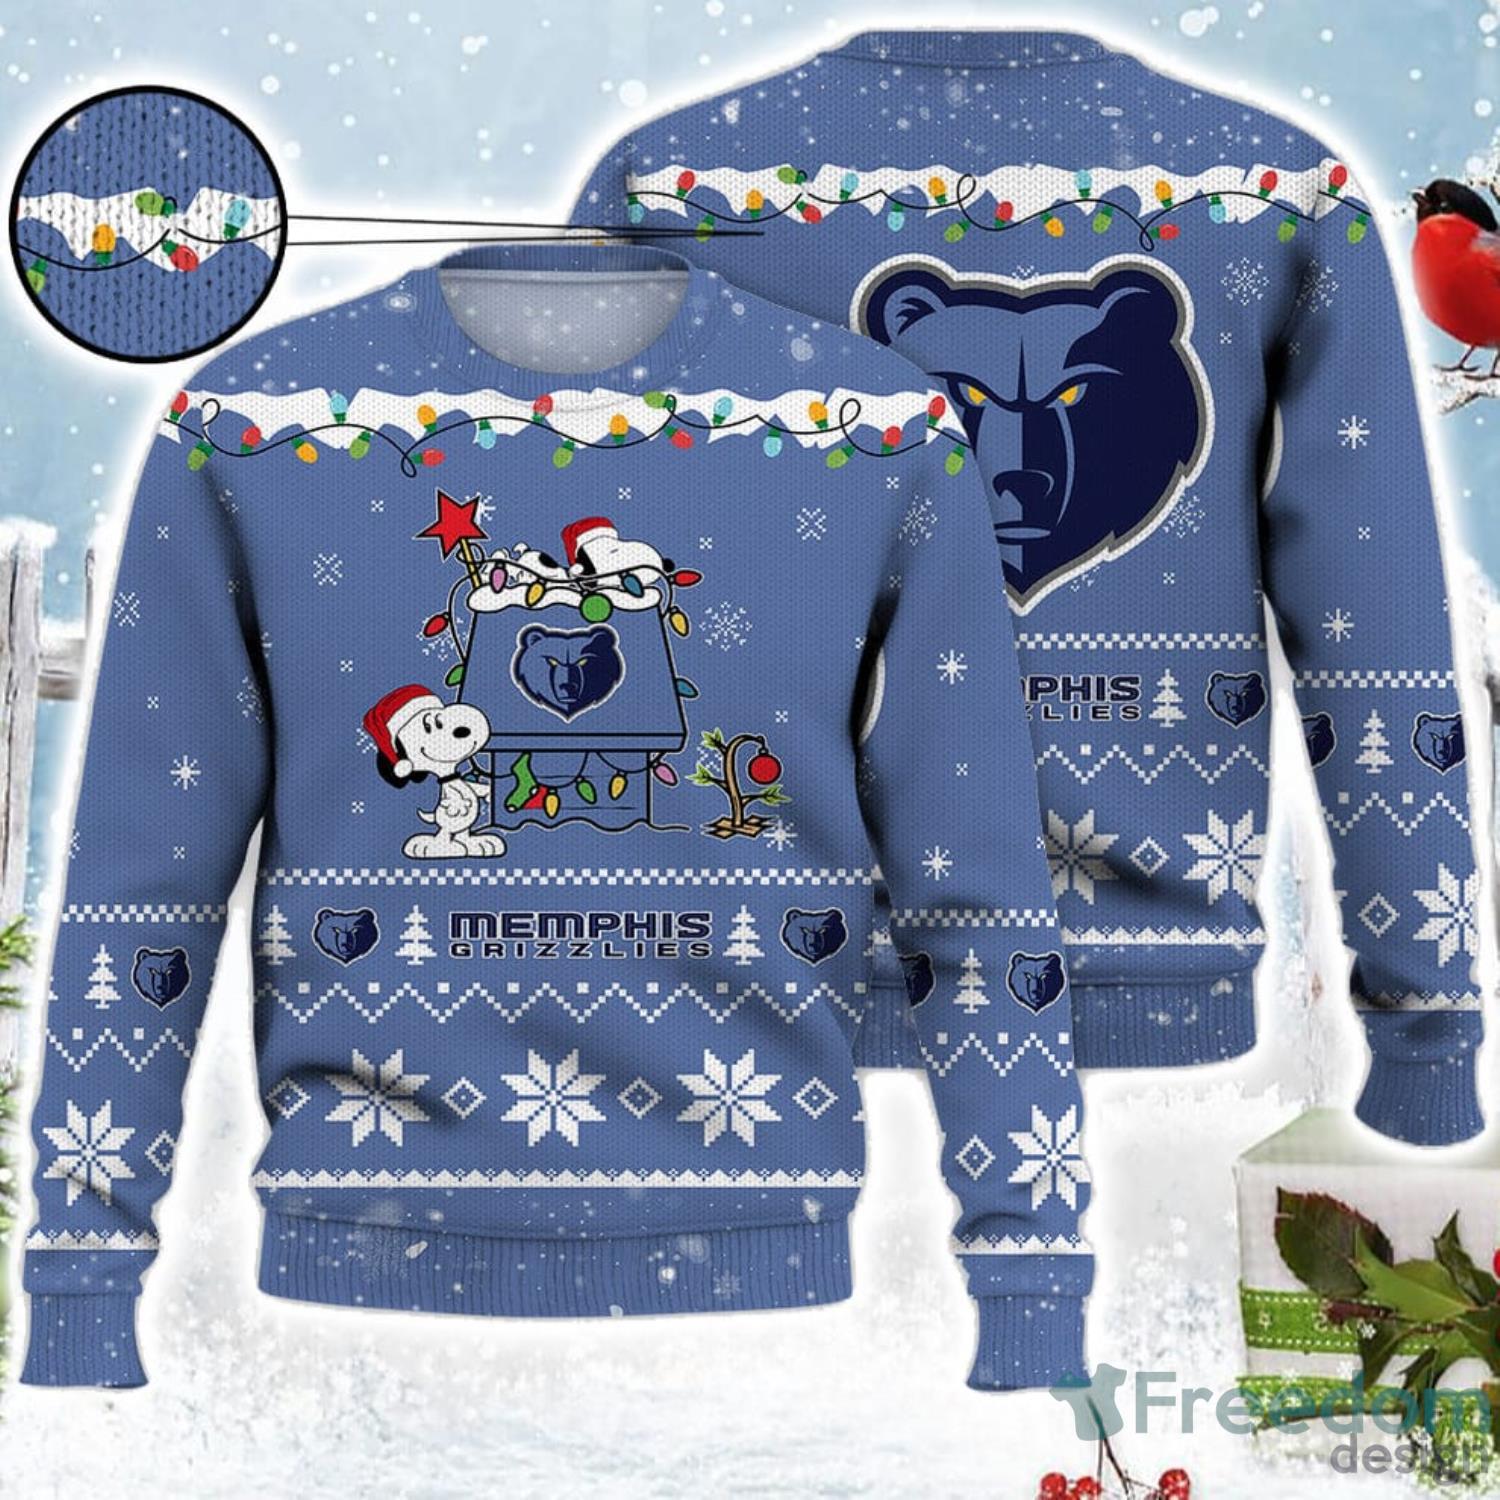 memphis grizzlies ugly sweater